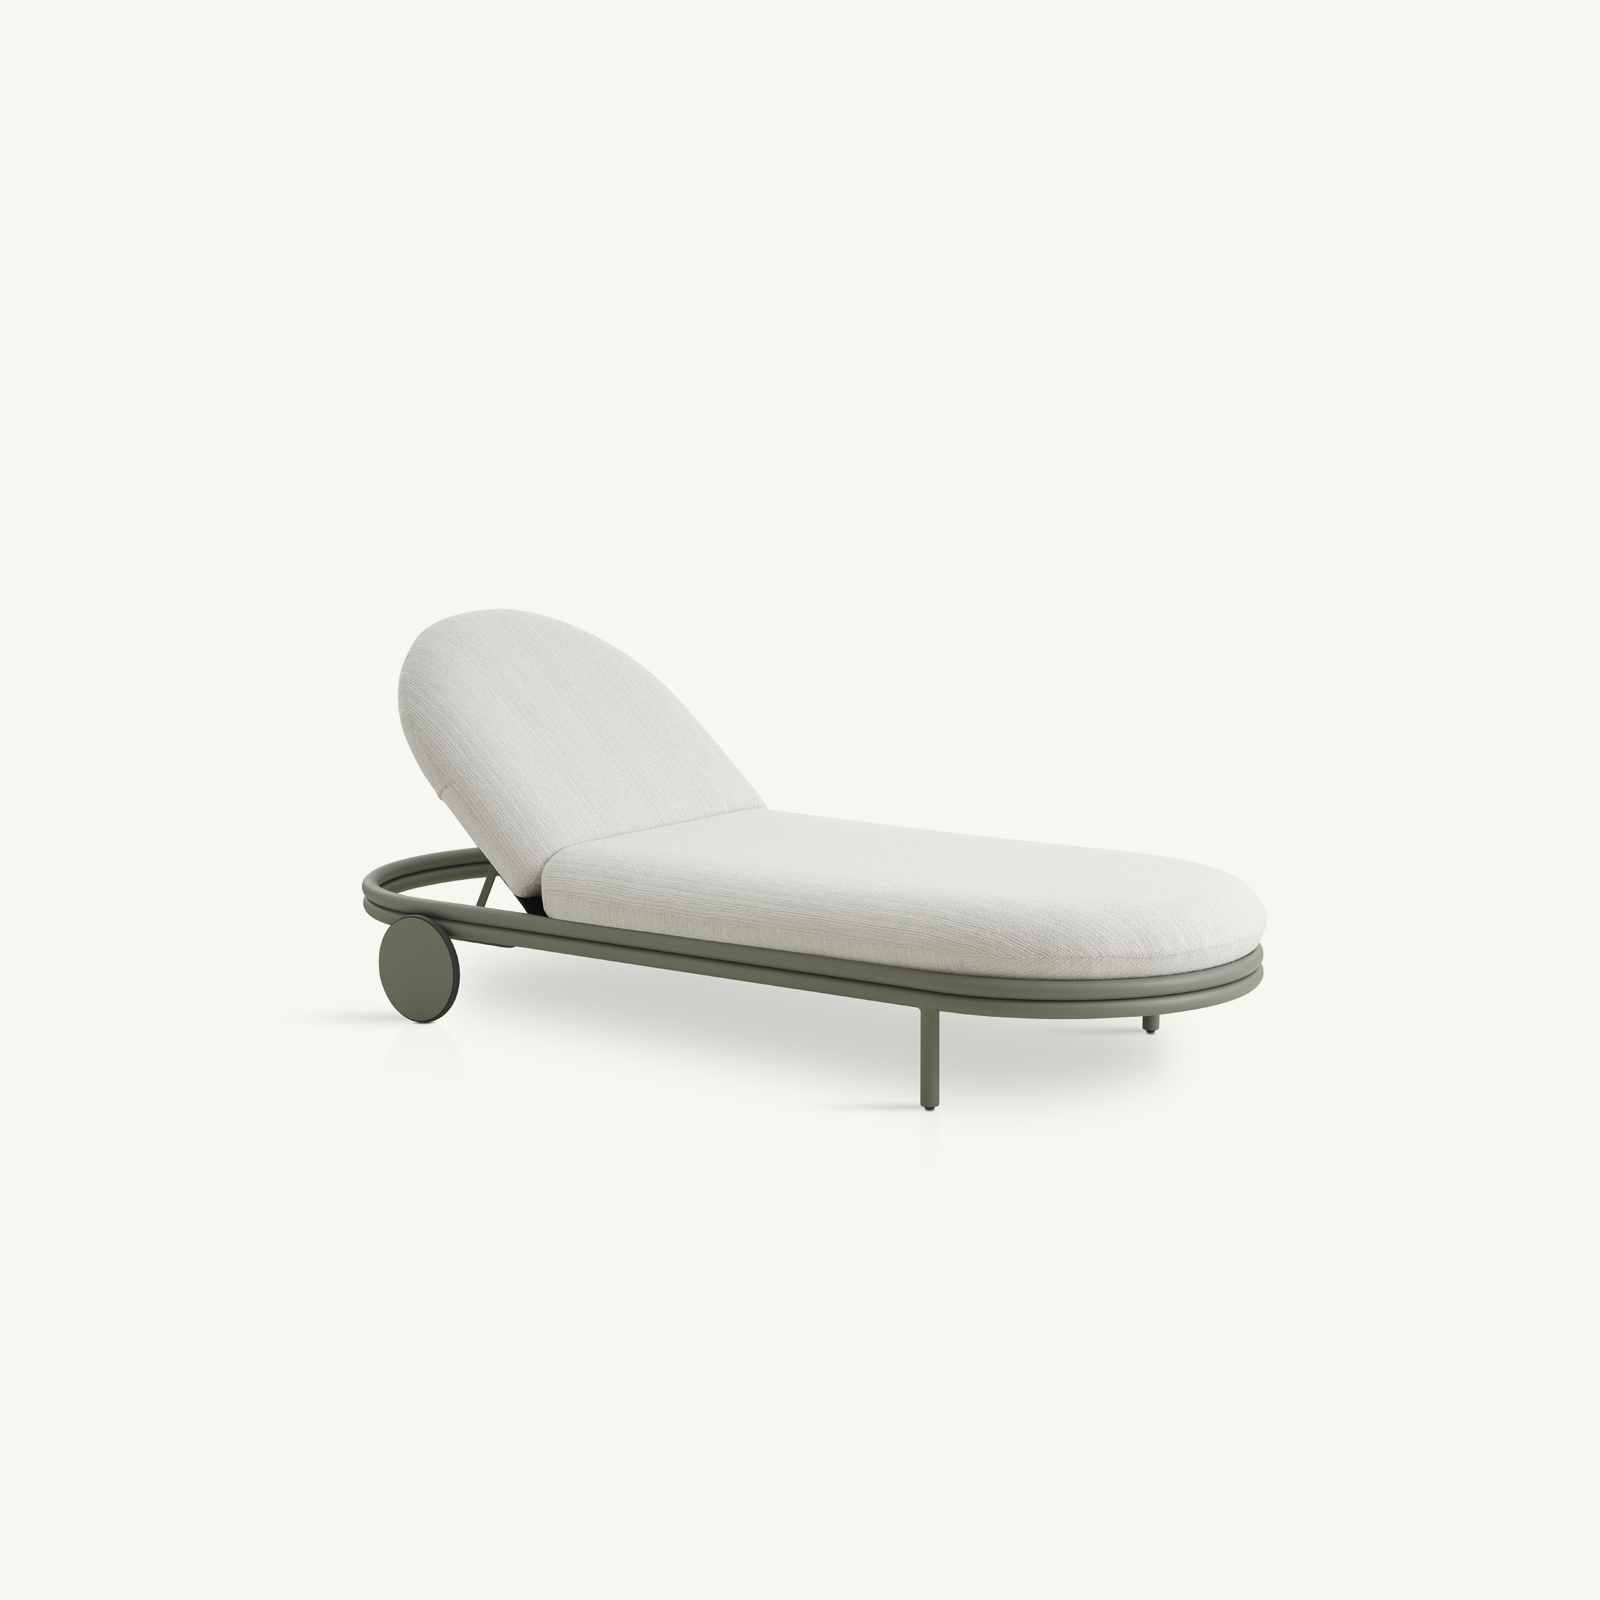 cask chaise longue with wheels